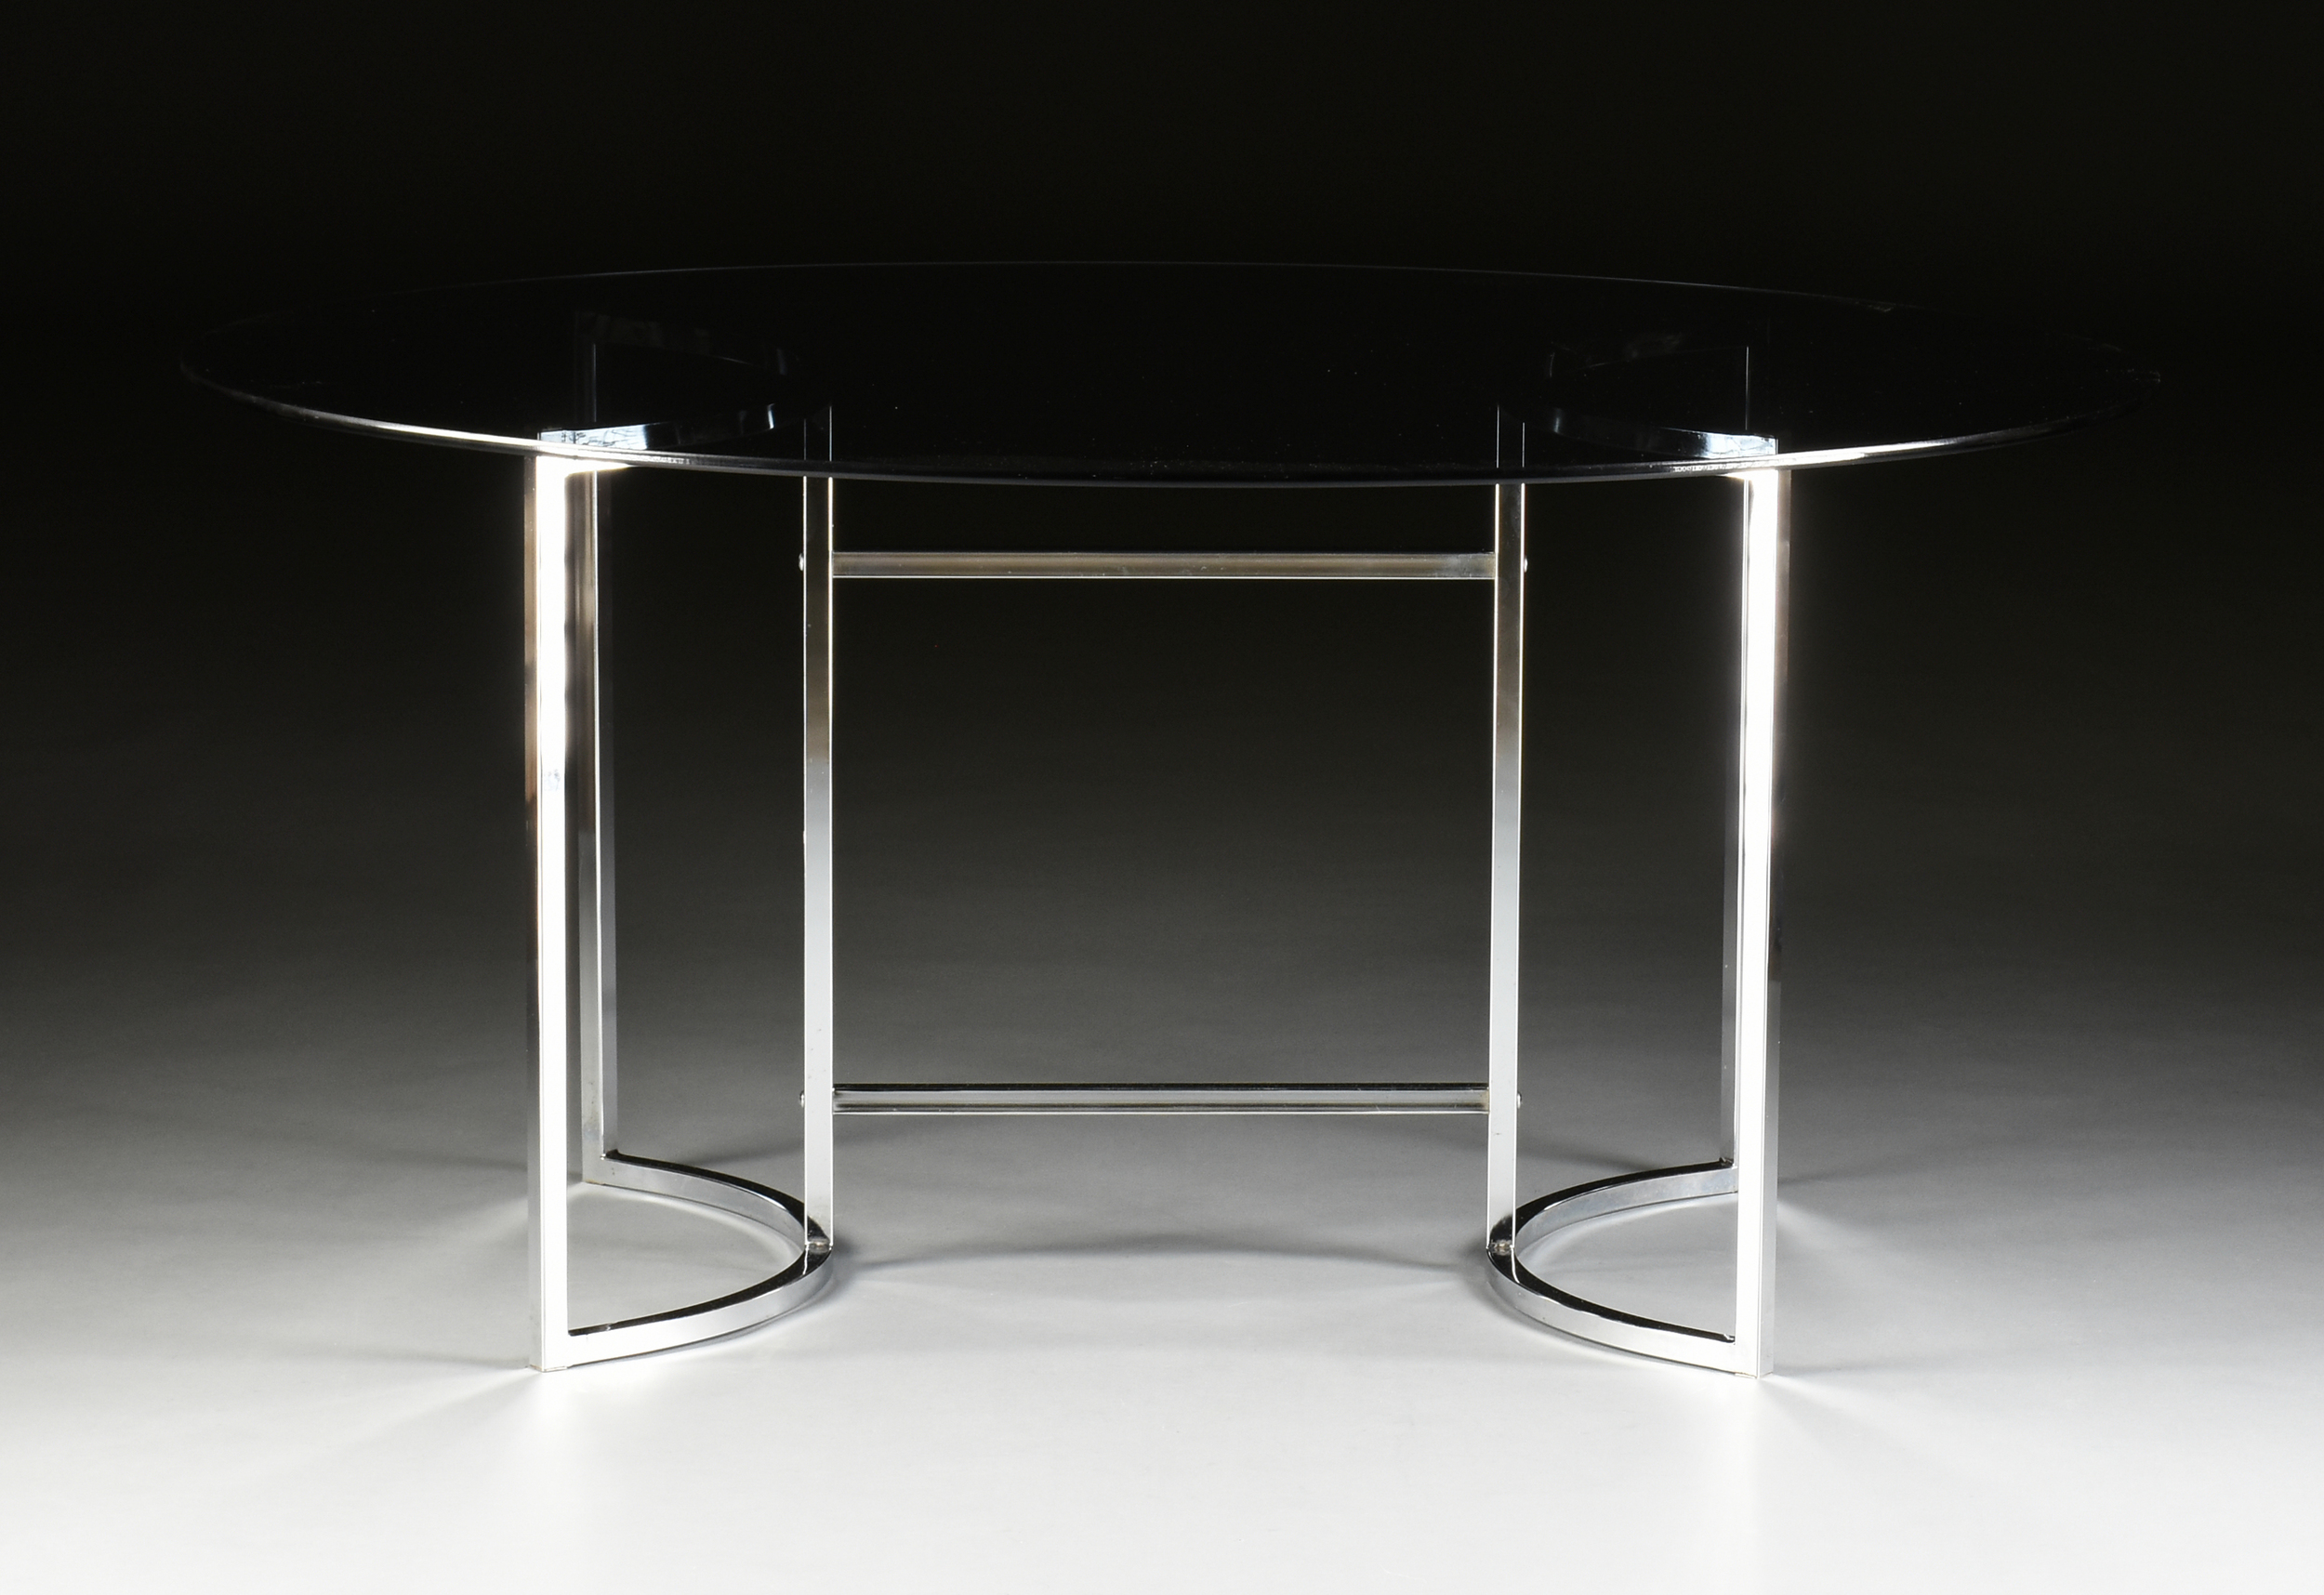 A MID CENTURY MODERN SMOKEY GLASS TOP CHROMED STEEL TABLE, AFTER MILO BAUGHMAN, MID/LATE 20TH